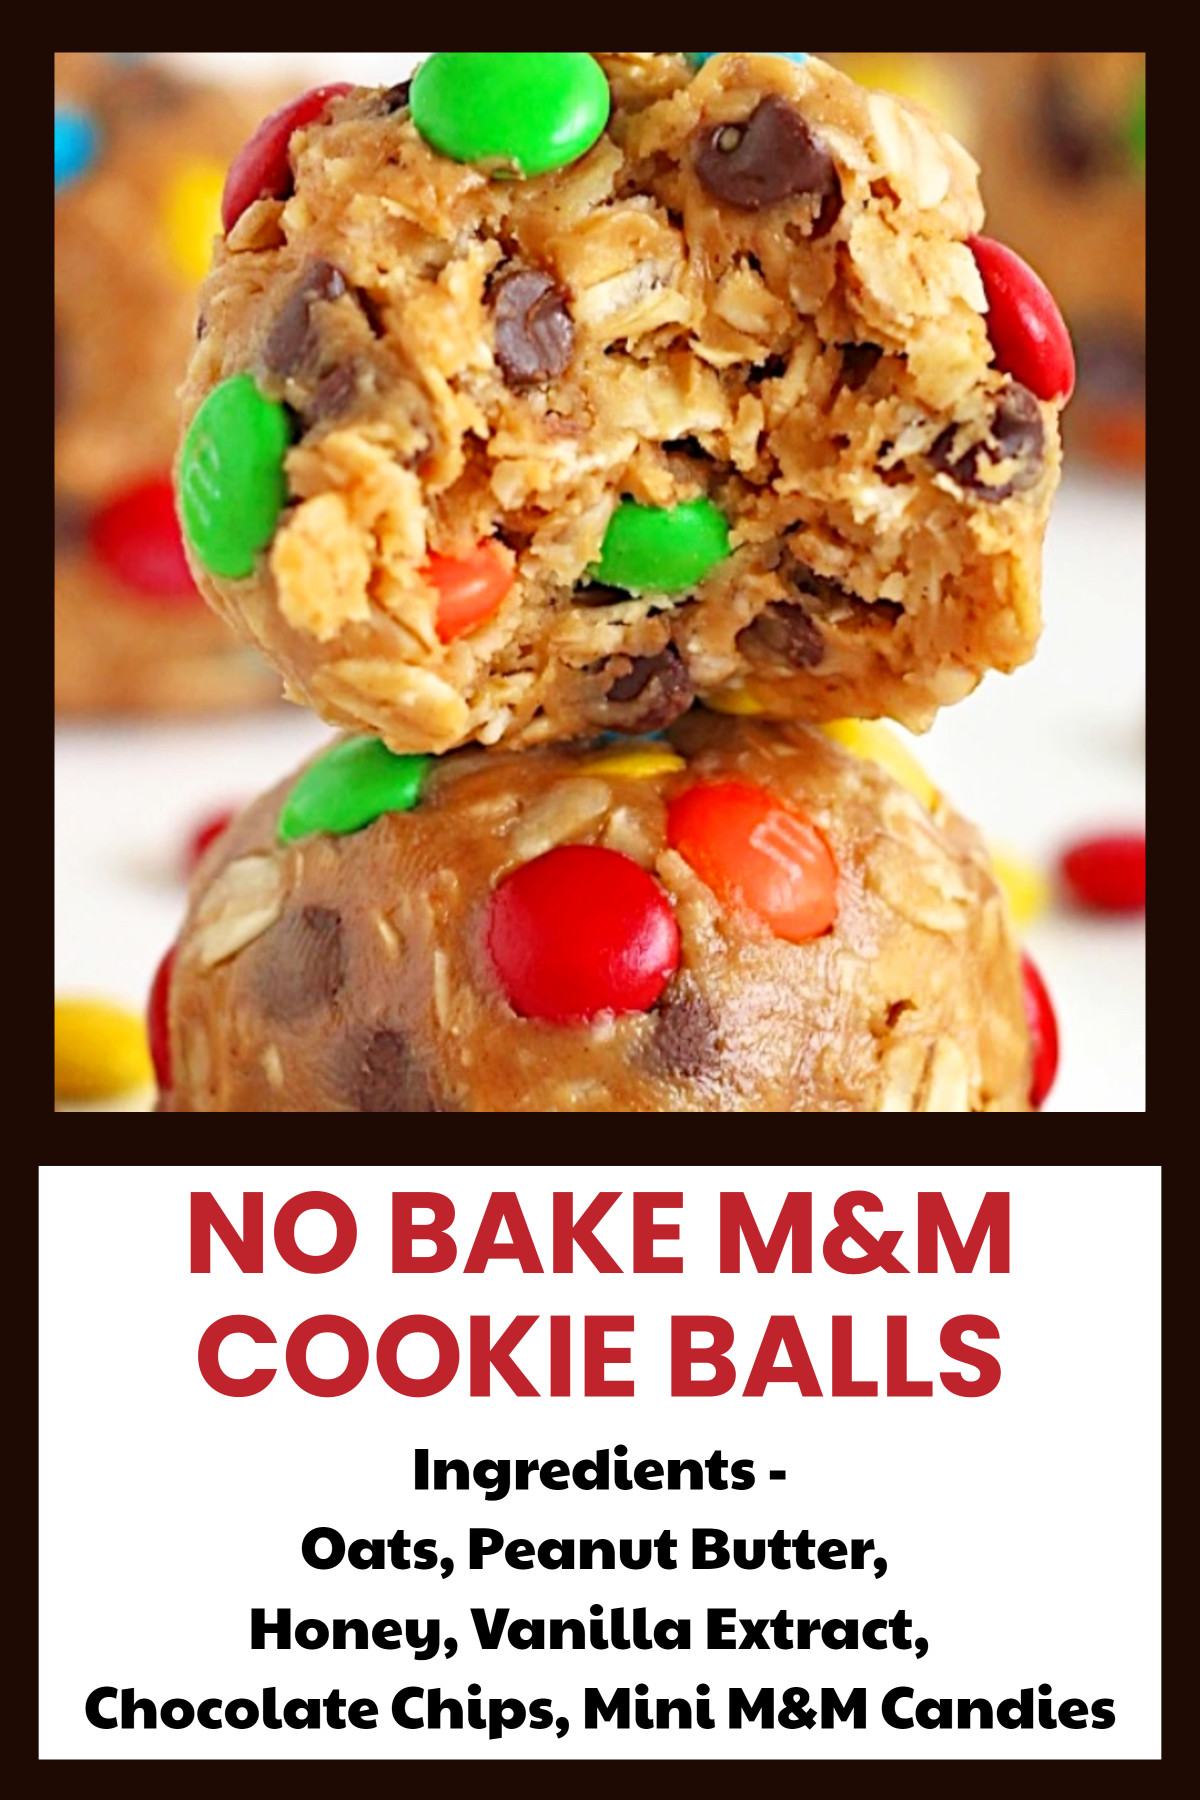 No Bake M&M Cookie Balls Recipes - made with aots, peanut butter, honey, vanilla extract, chocolate chips and mini M&M candies